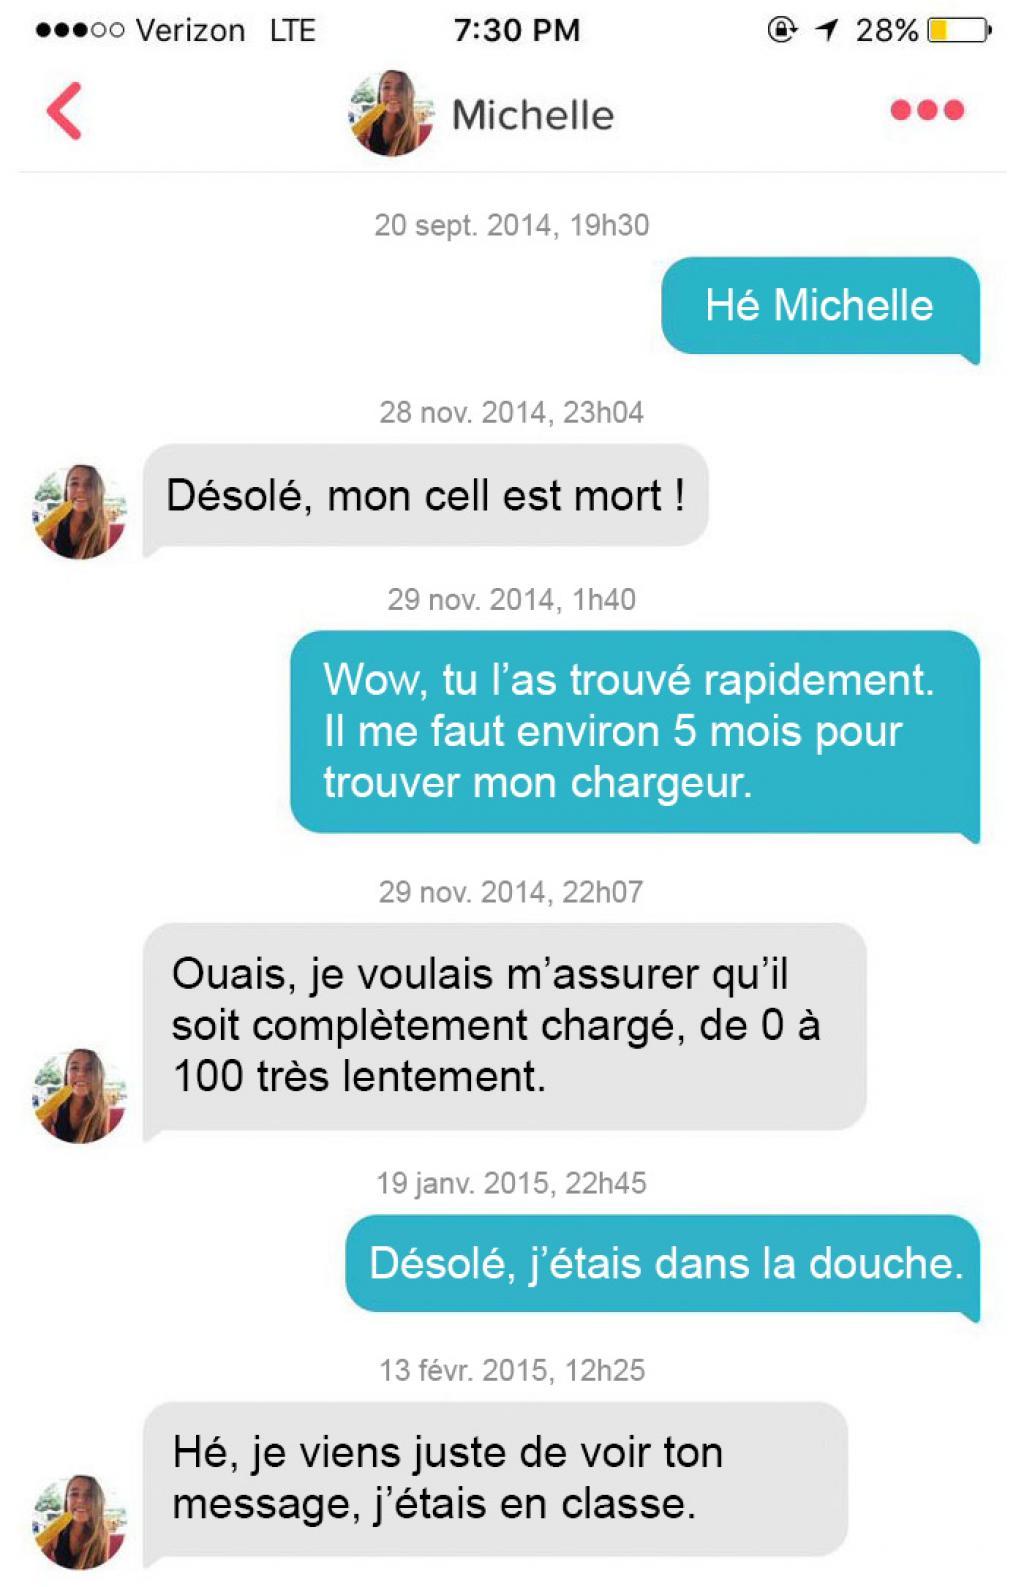 Rencontres Tinder compte trouver luxembourgeois guiderasi